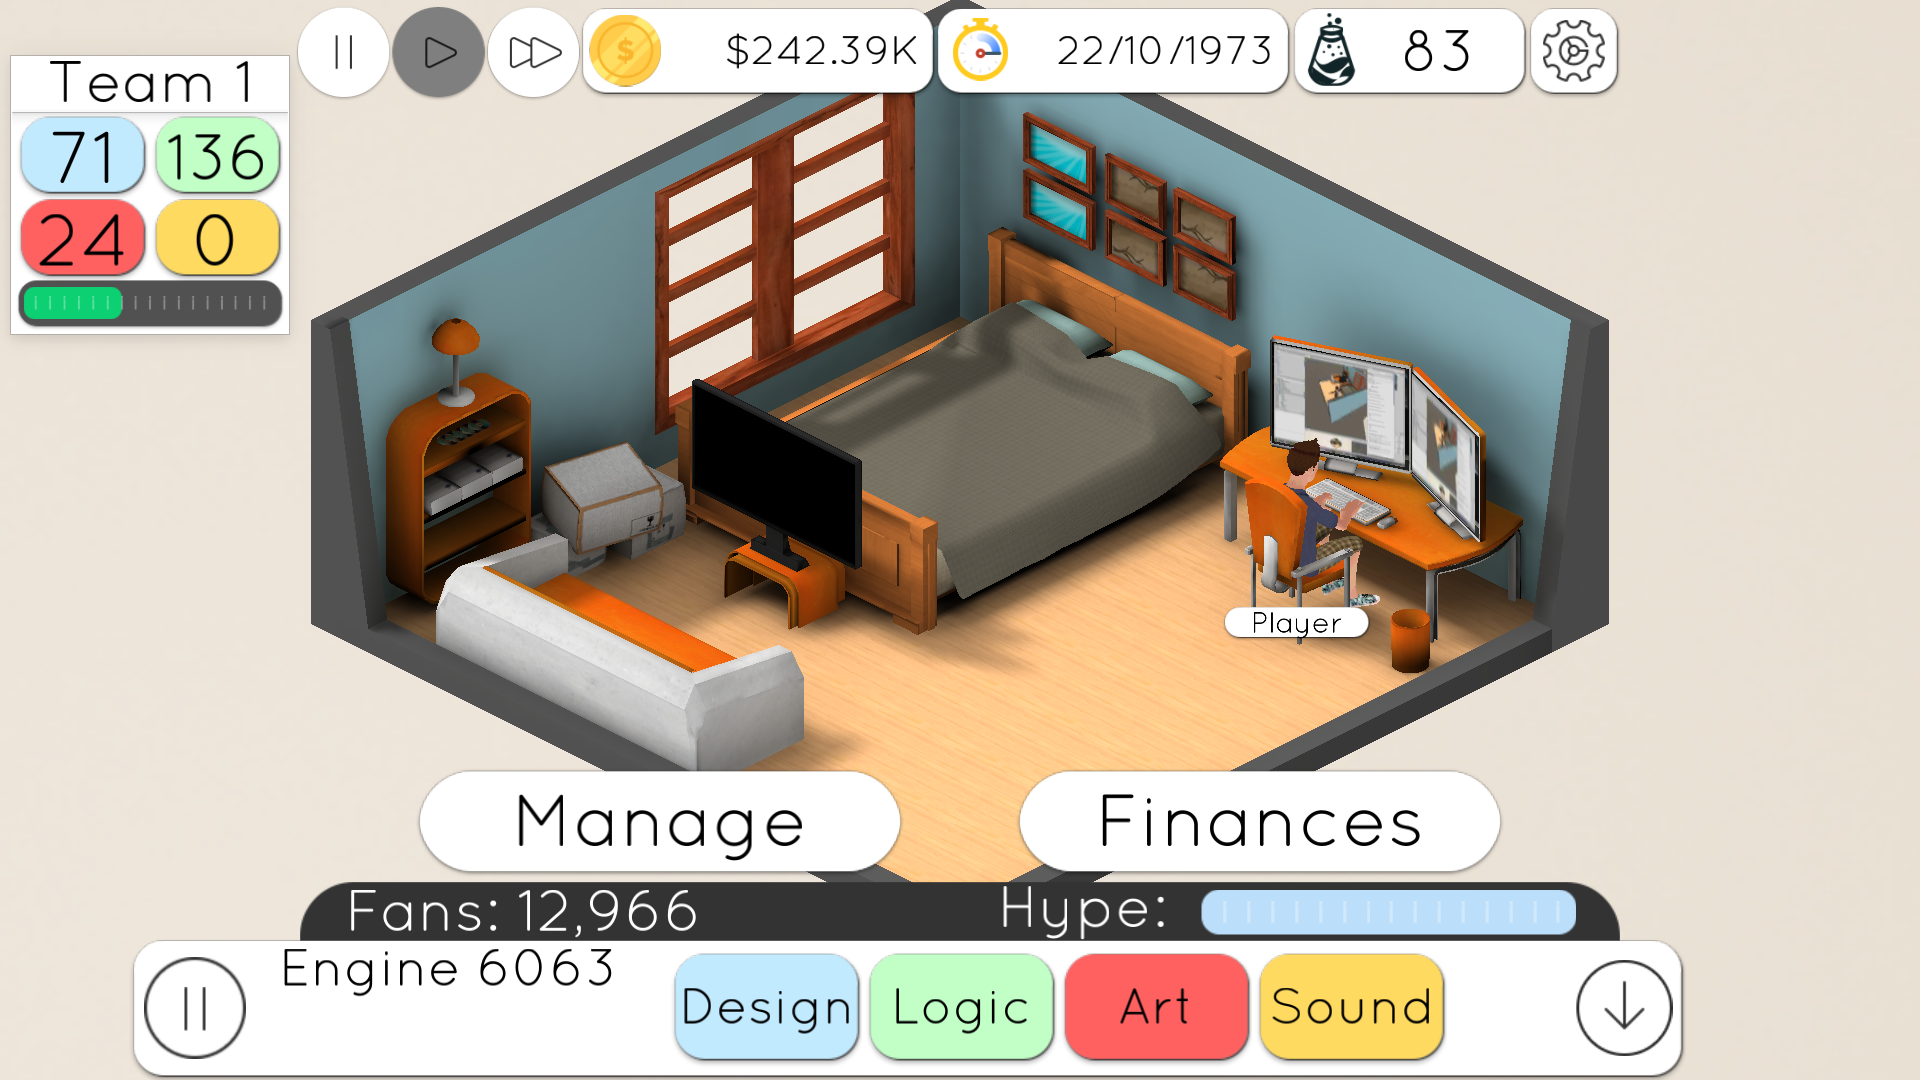 Devices tycoon 3.3. Game Studio Tycoon Android. Dev Tycoon 2. Game Studio Tycoon 2. Dev Tycoon андроид.